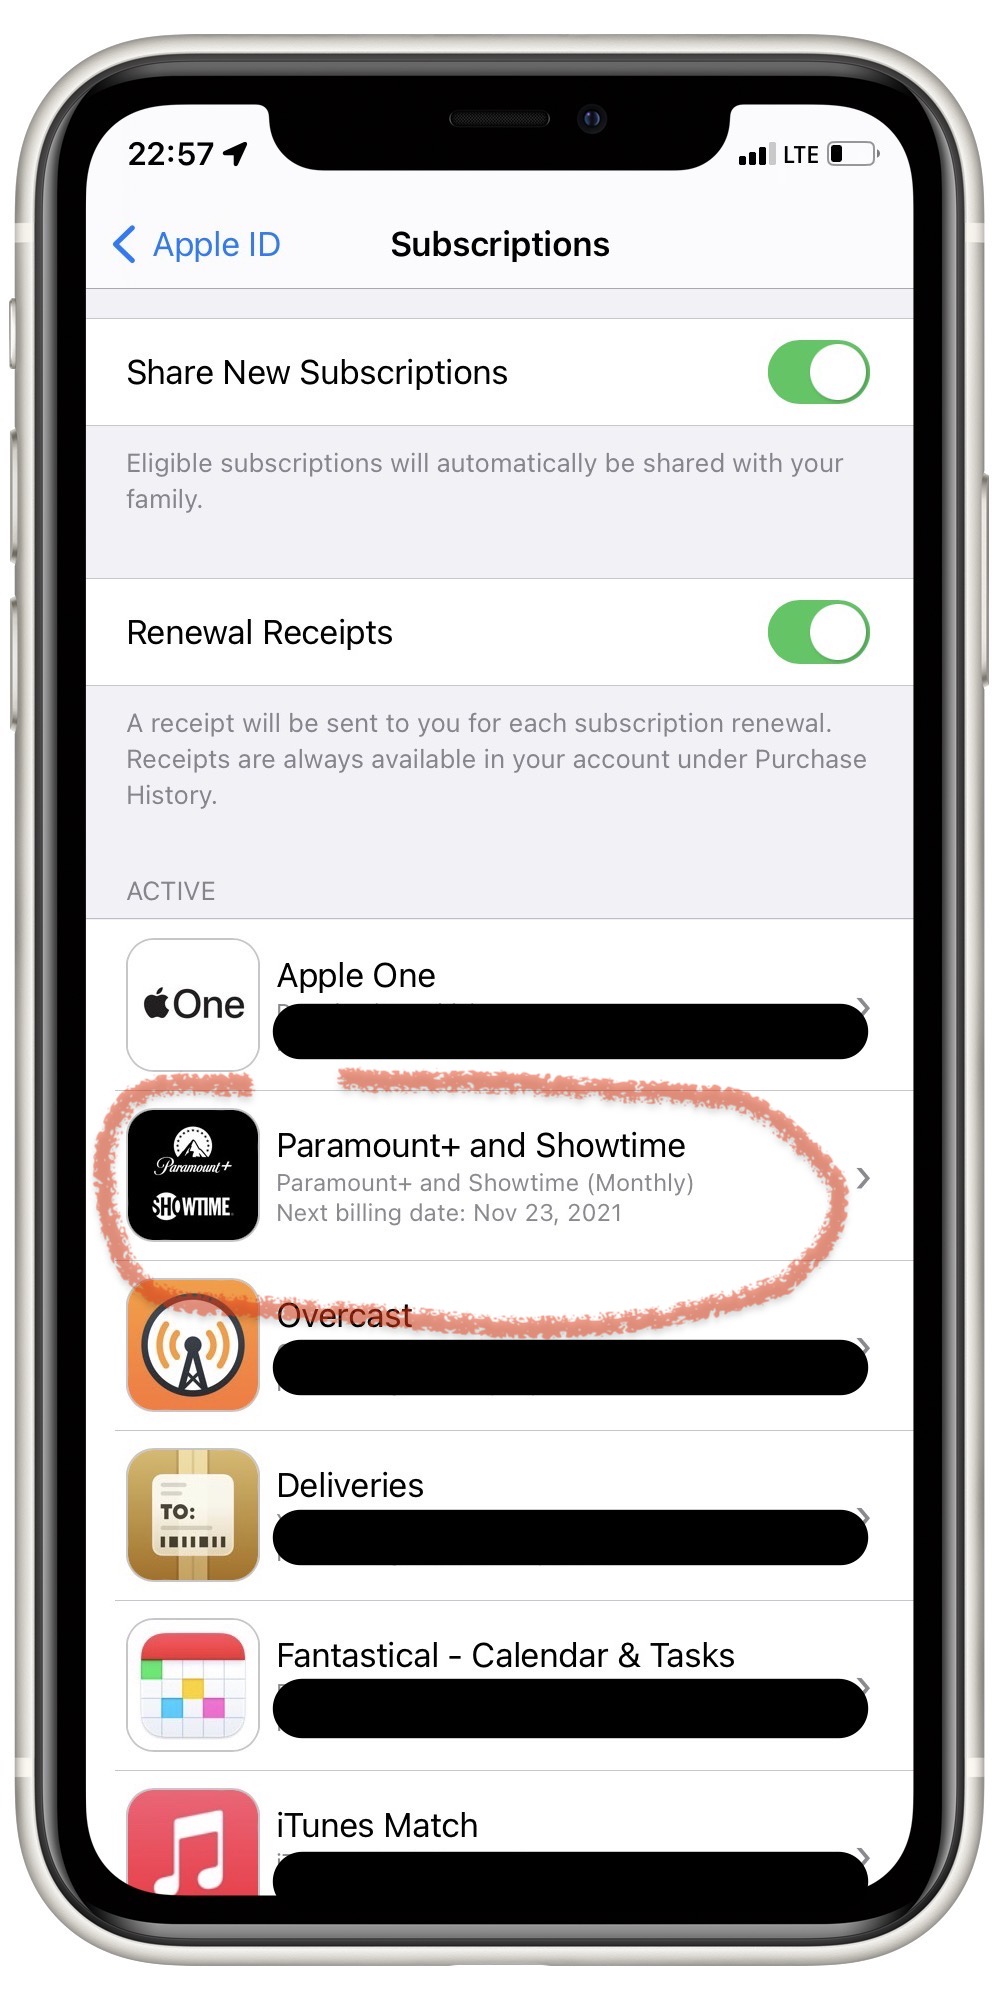 The Subscriptions page of the Settings: AppleID/ iCloud app. You can clearly see all subscriptions listed. Click on a subscription to see details.